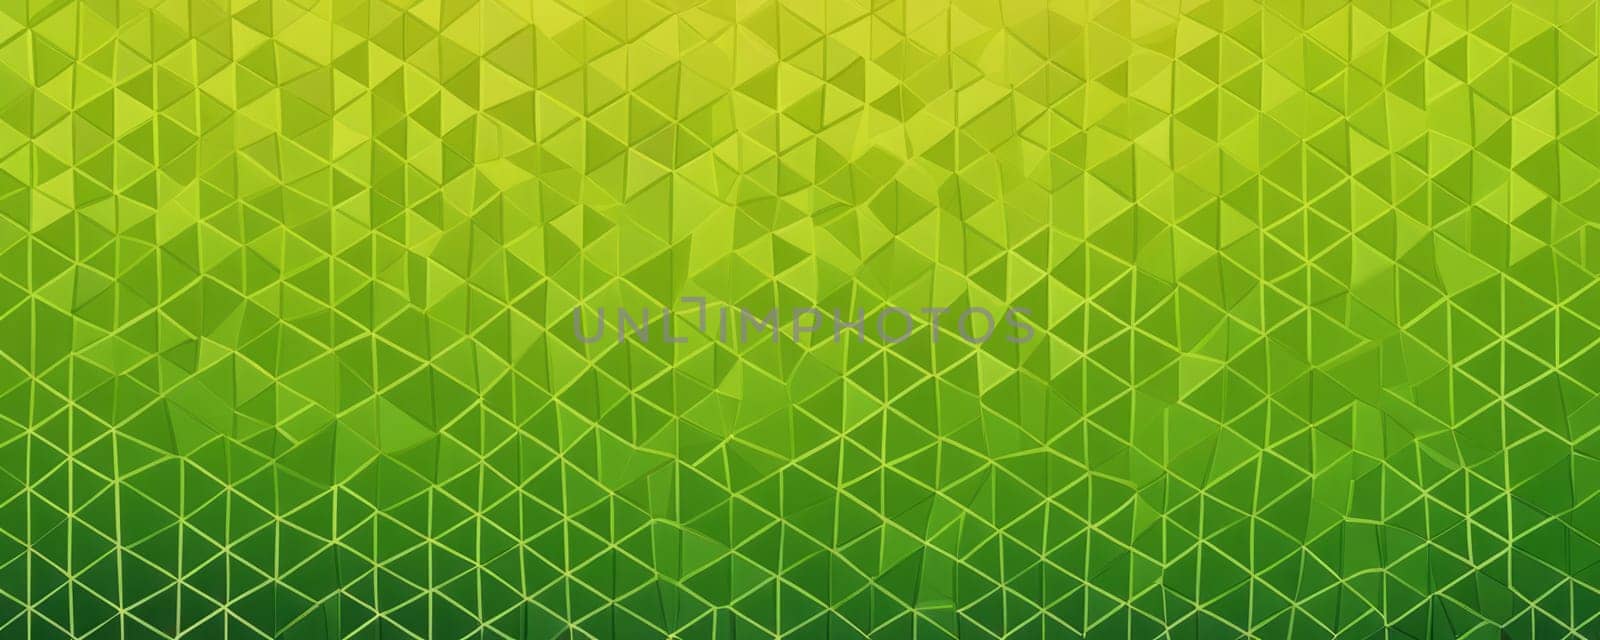 Mosaic Shapes in Olive Lime green by nkotlyar